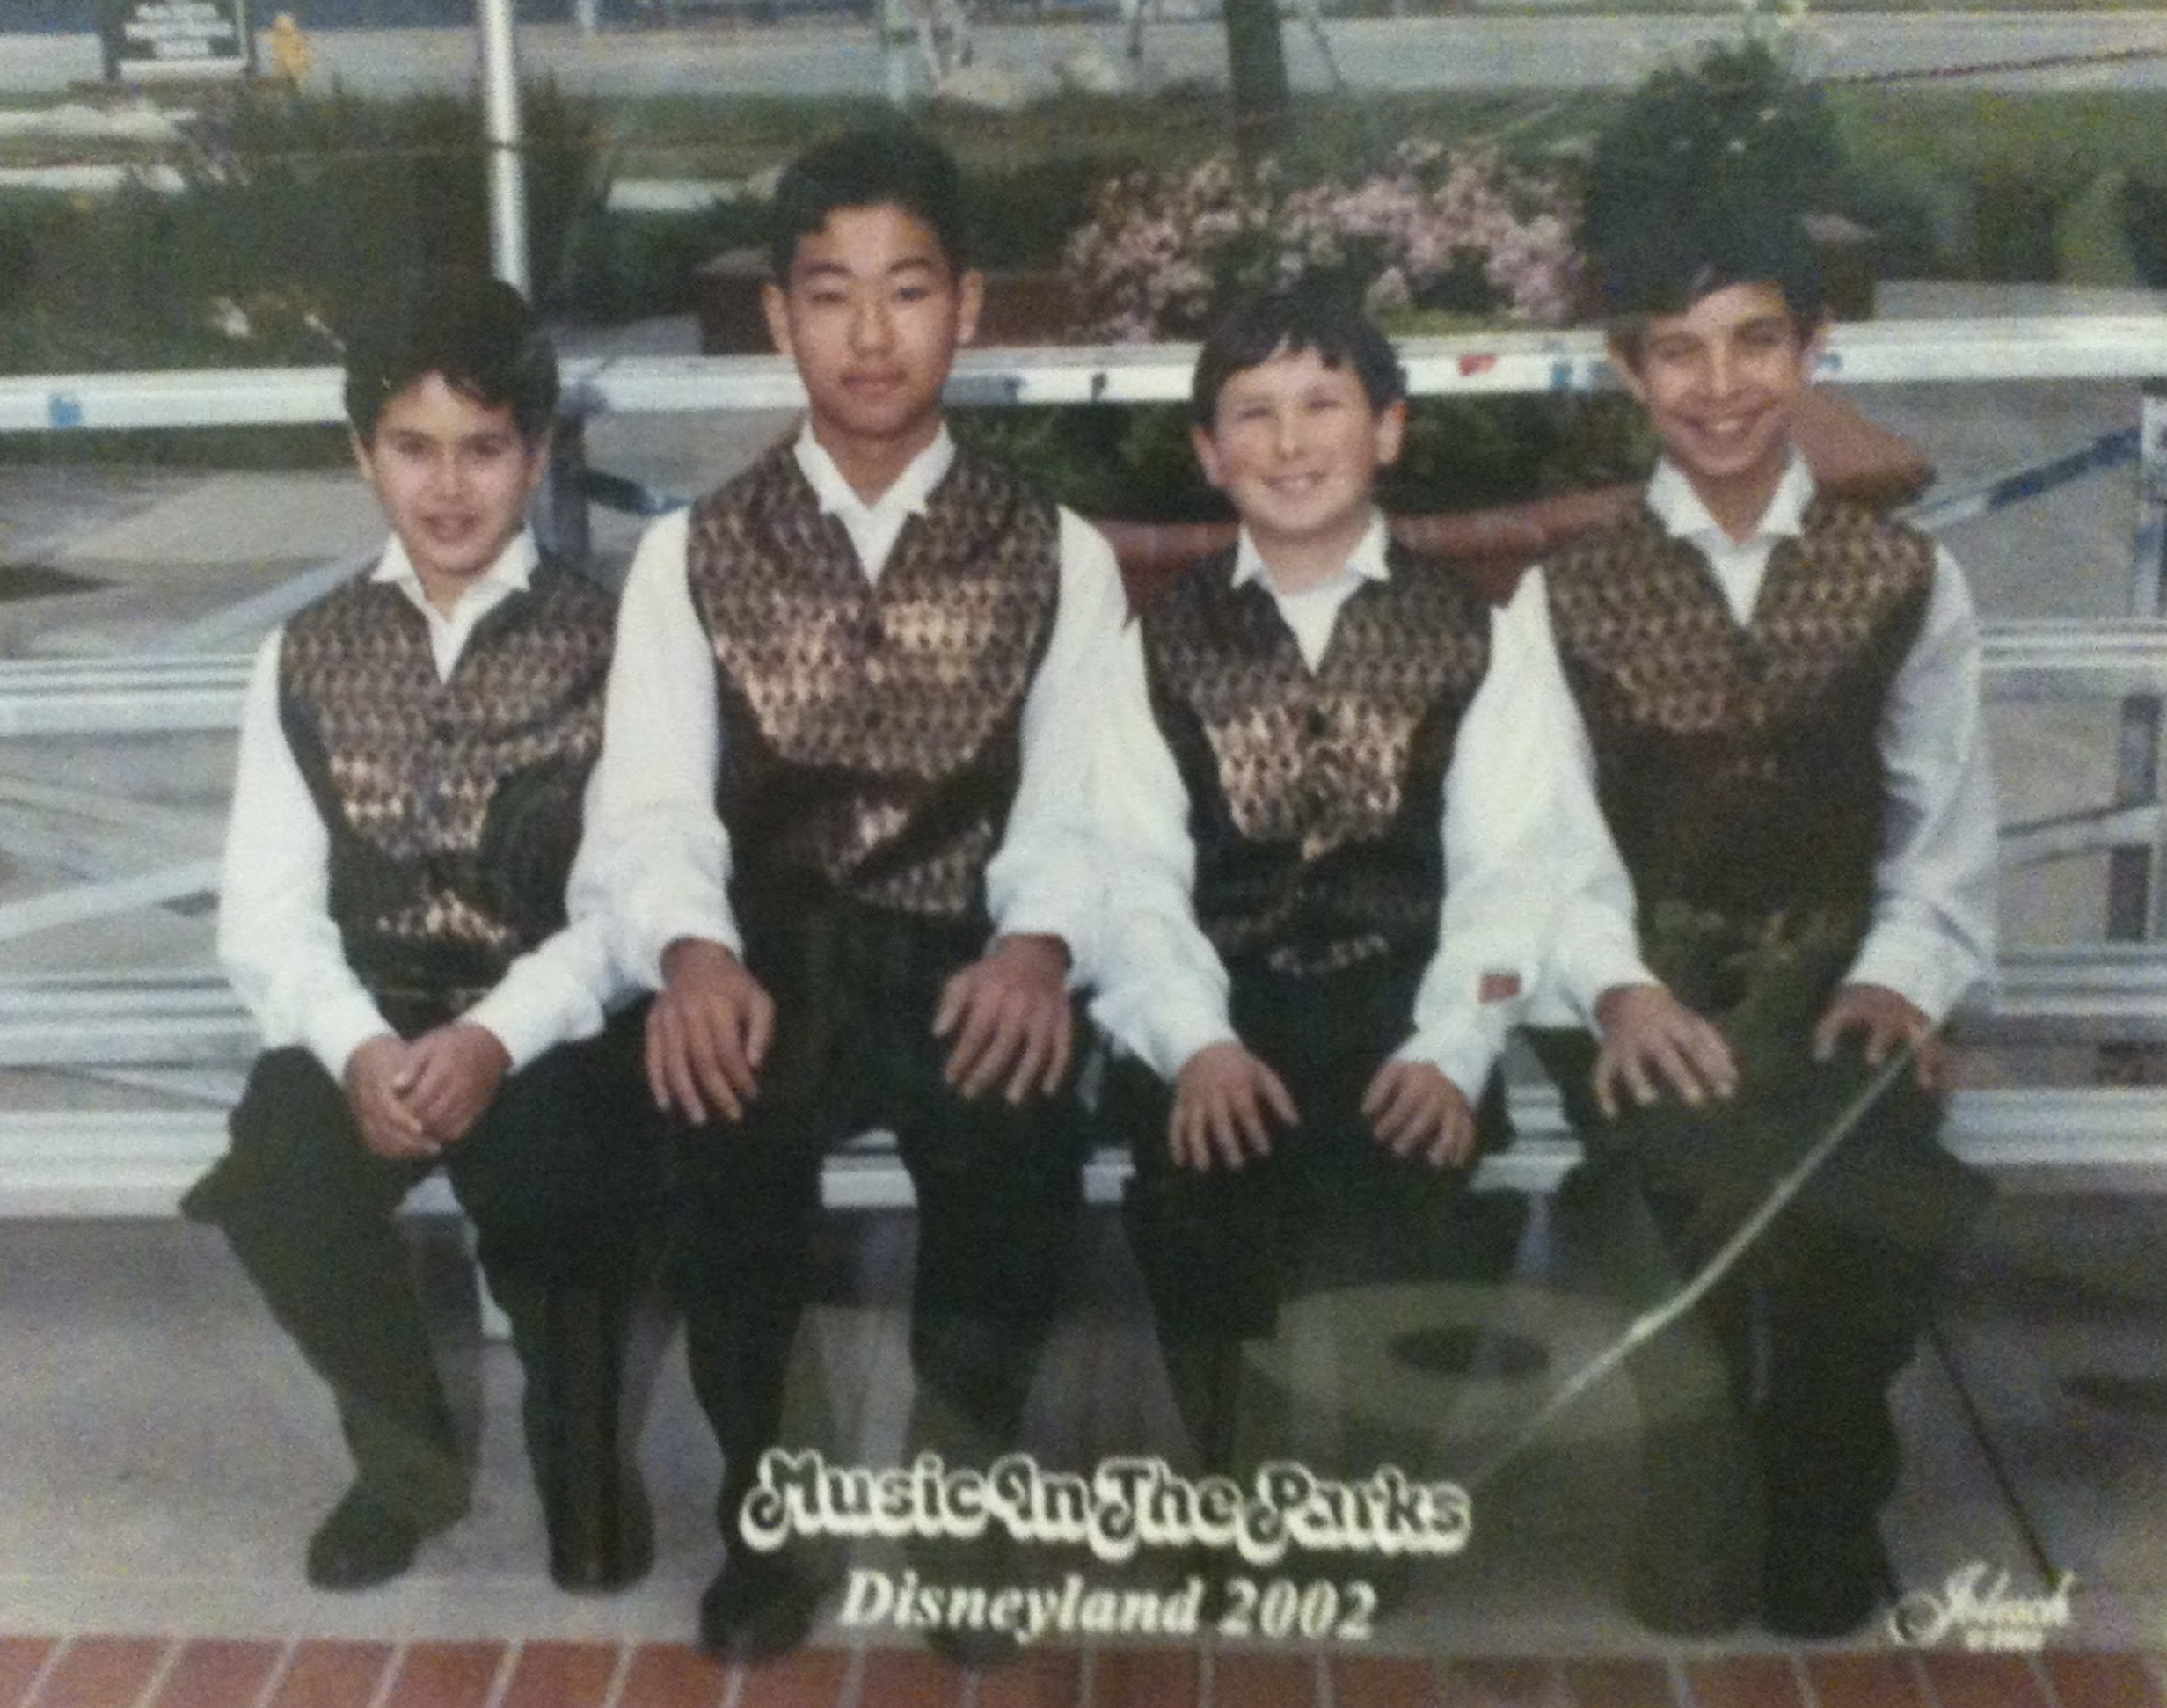 A grainy photo of four clean-cut boys sitting side by side on a bench, facing the camera, wearing white button collard shirts, black pants and fancy vests. The boy on the far left is Chorus Connection founder Jacob Levine when he was in 7th grade. The photo bears text that reads "Music In The Parks - Disneyland 2002"